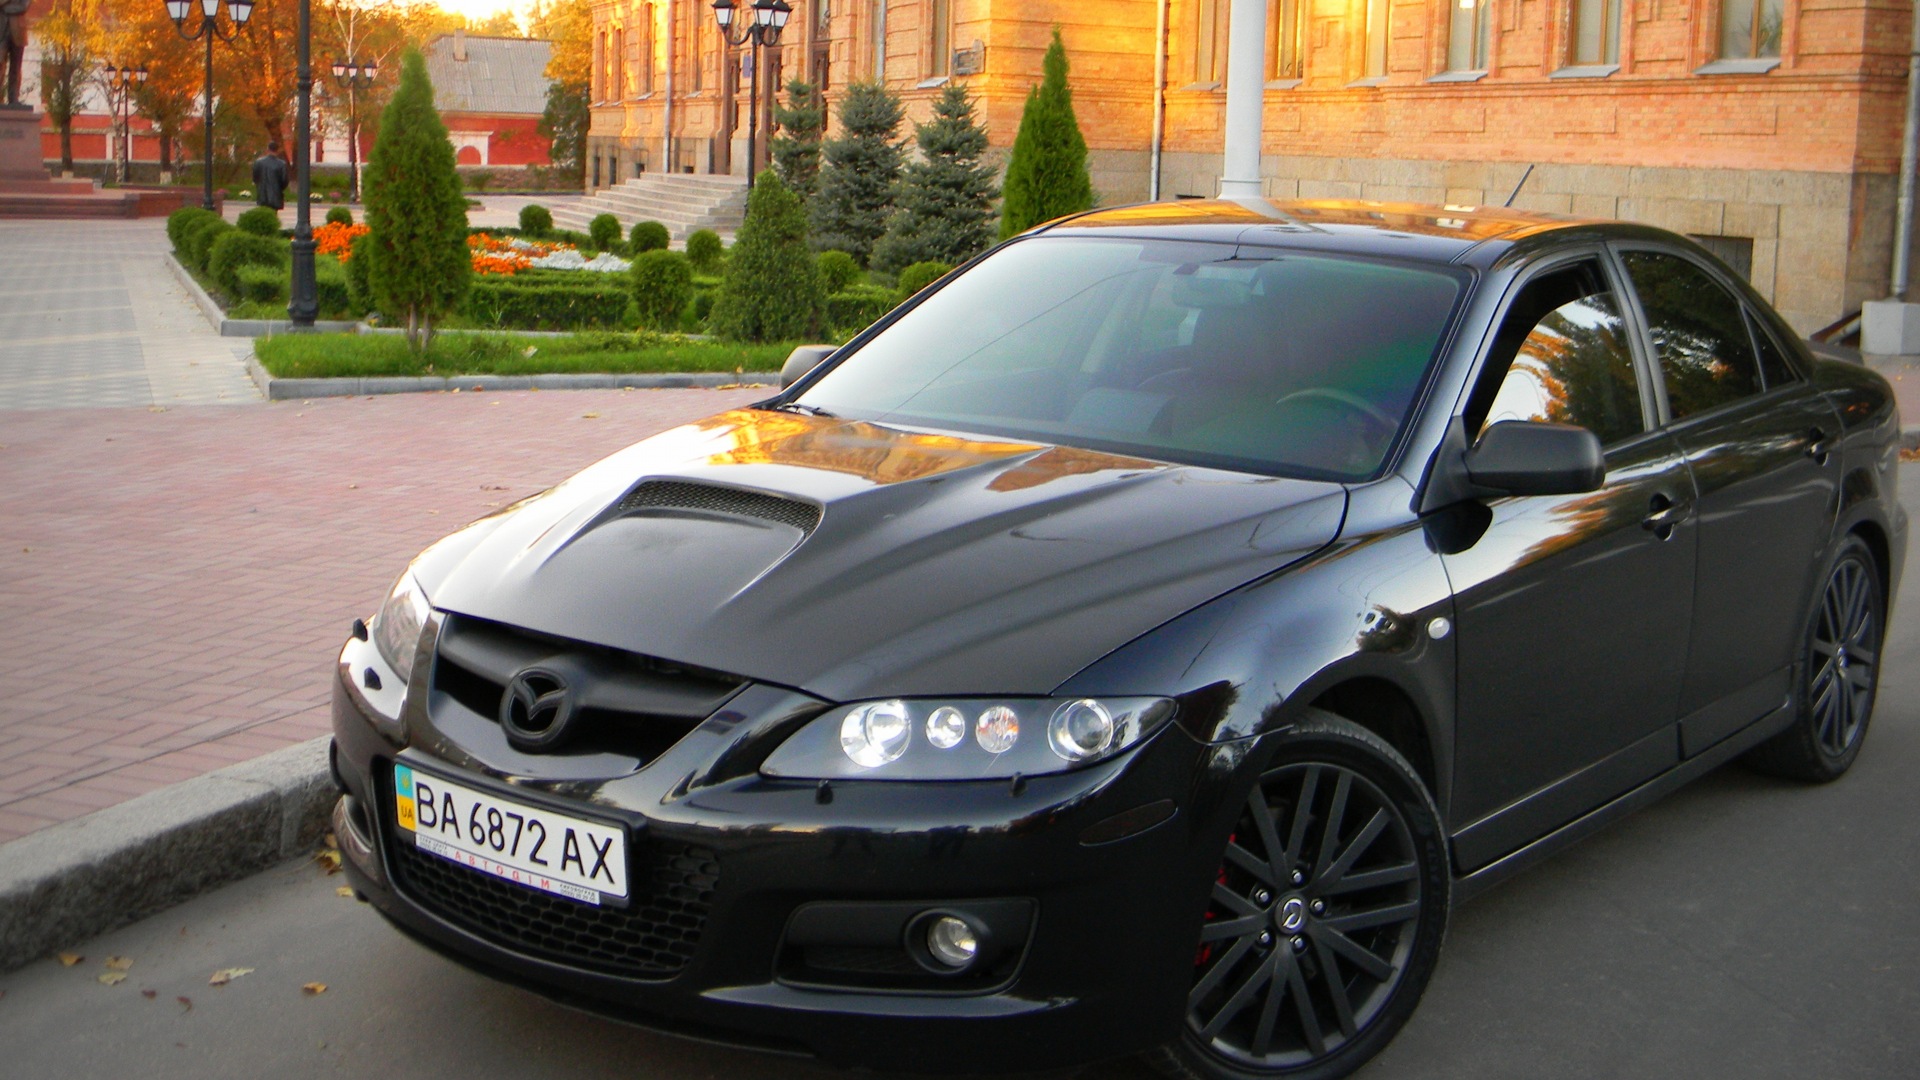 Mazda gg 2007. Mazda 6 MPS 2007. Mazda 6 gg MPS. Mazda 6 MPS черная. Мазда 6 MPS 2006.